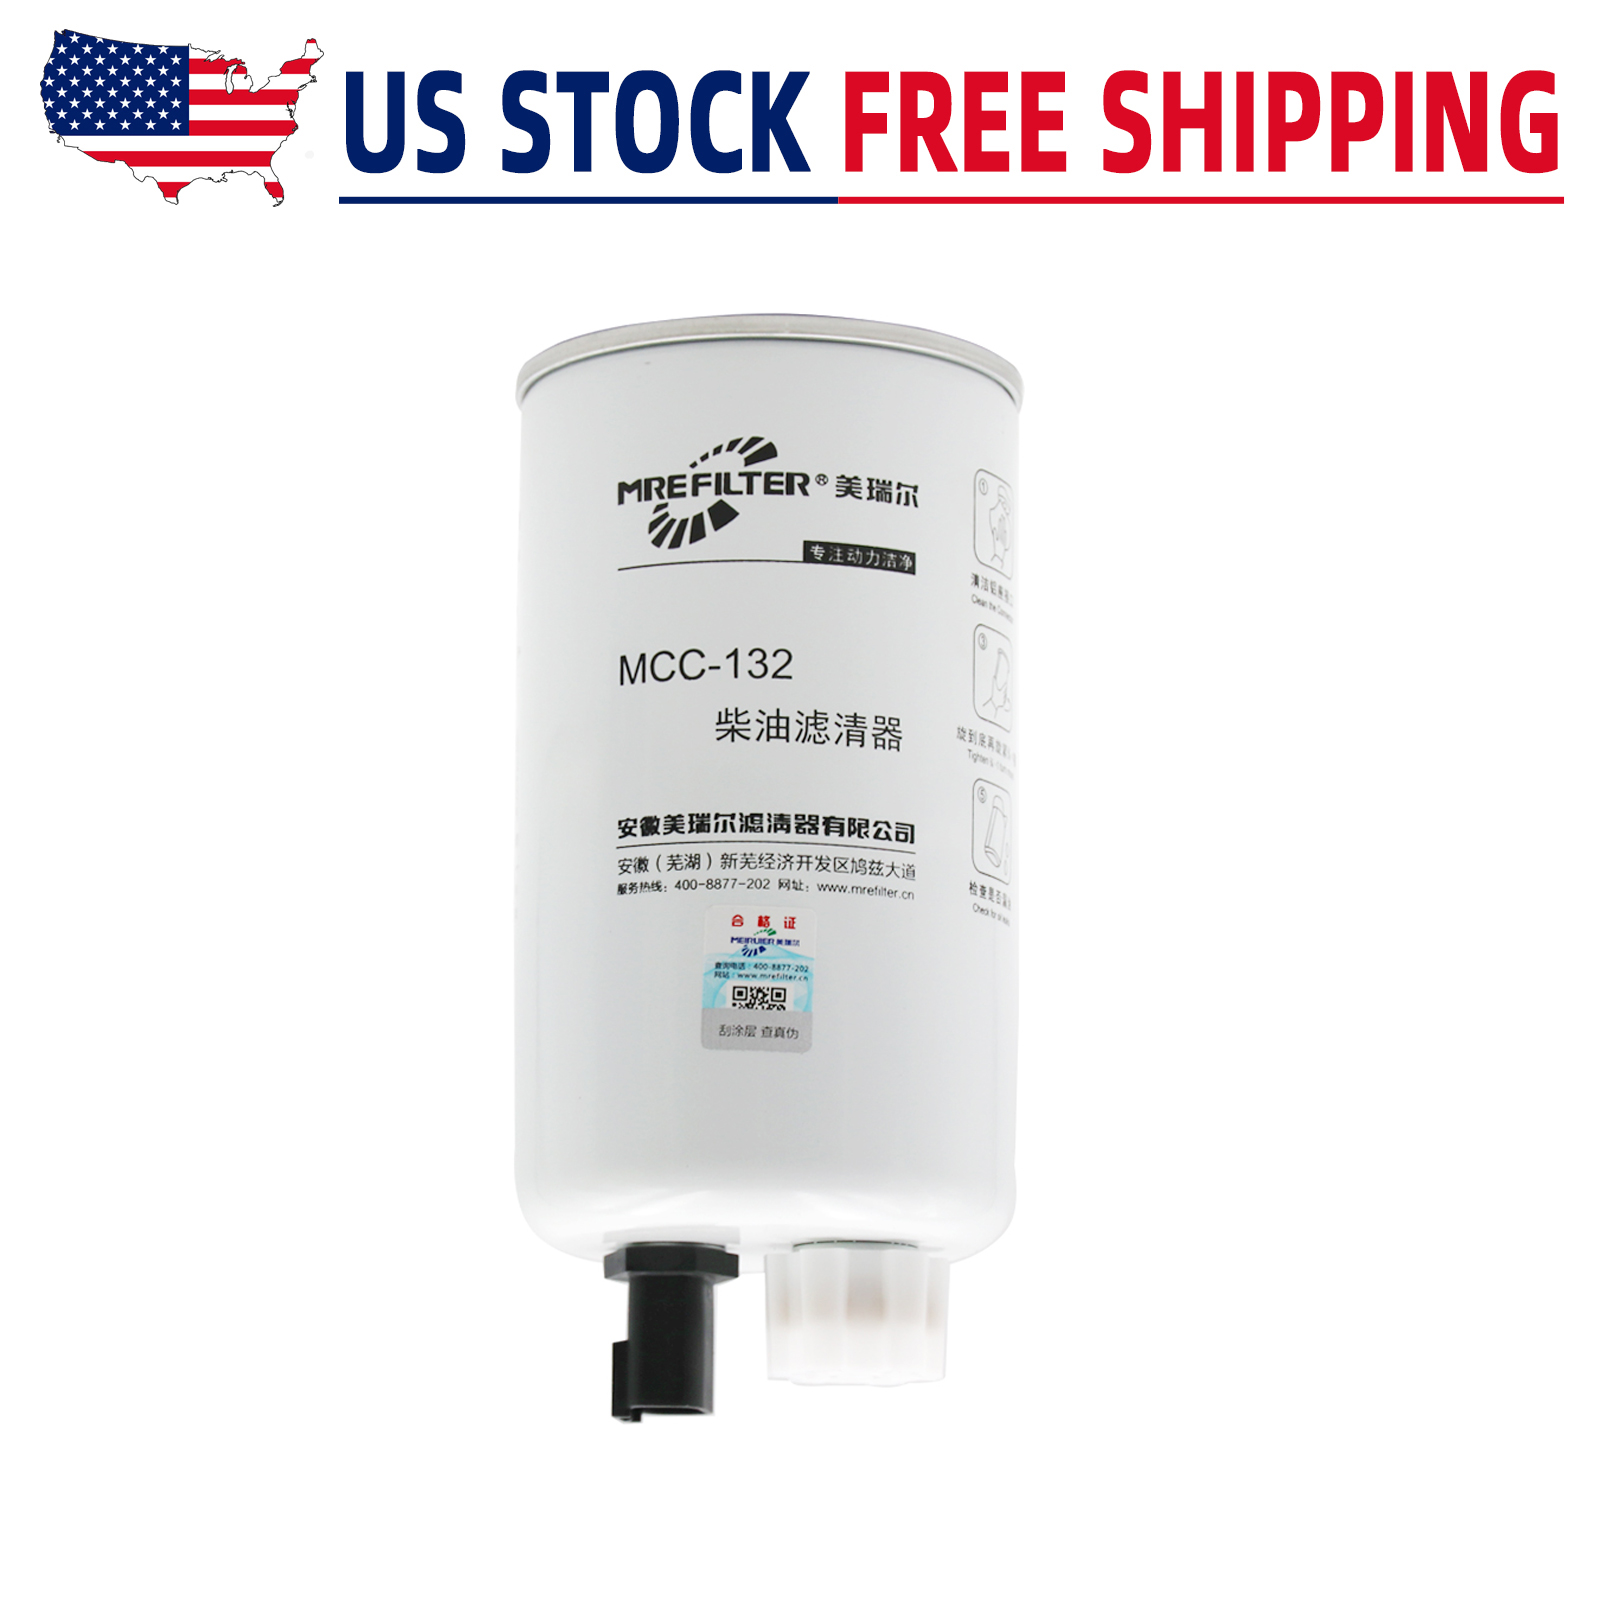 FS19732 Fuel Filter Water Separator for 33732 CQ 86732 Napa 3732 - image 1 of 5